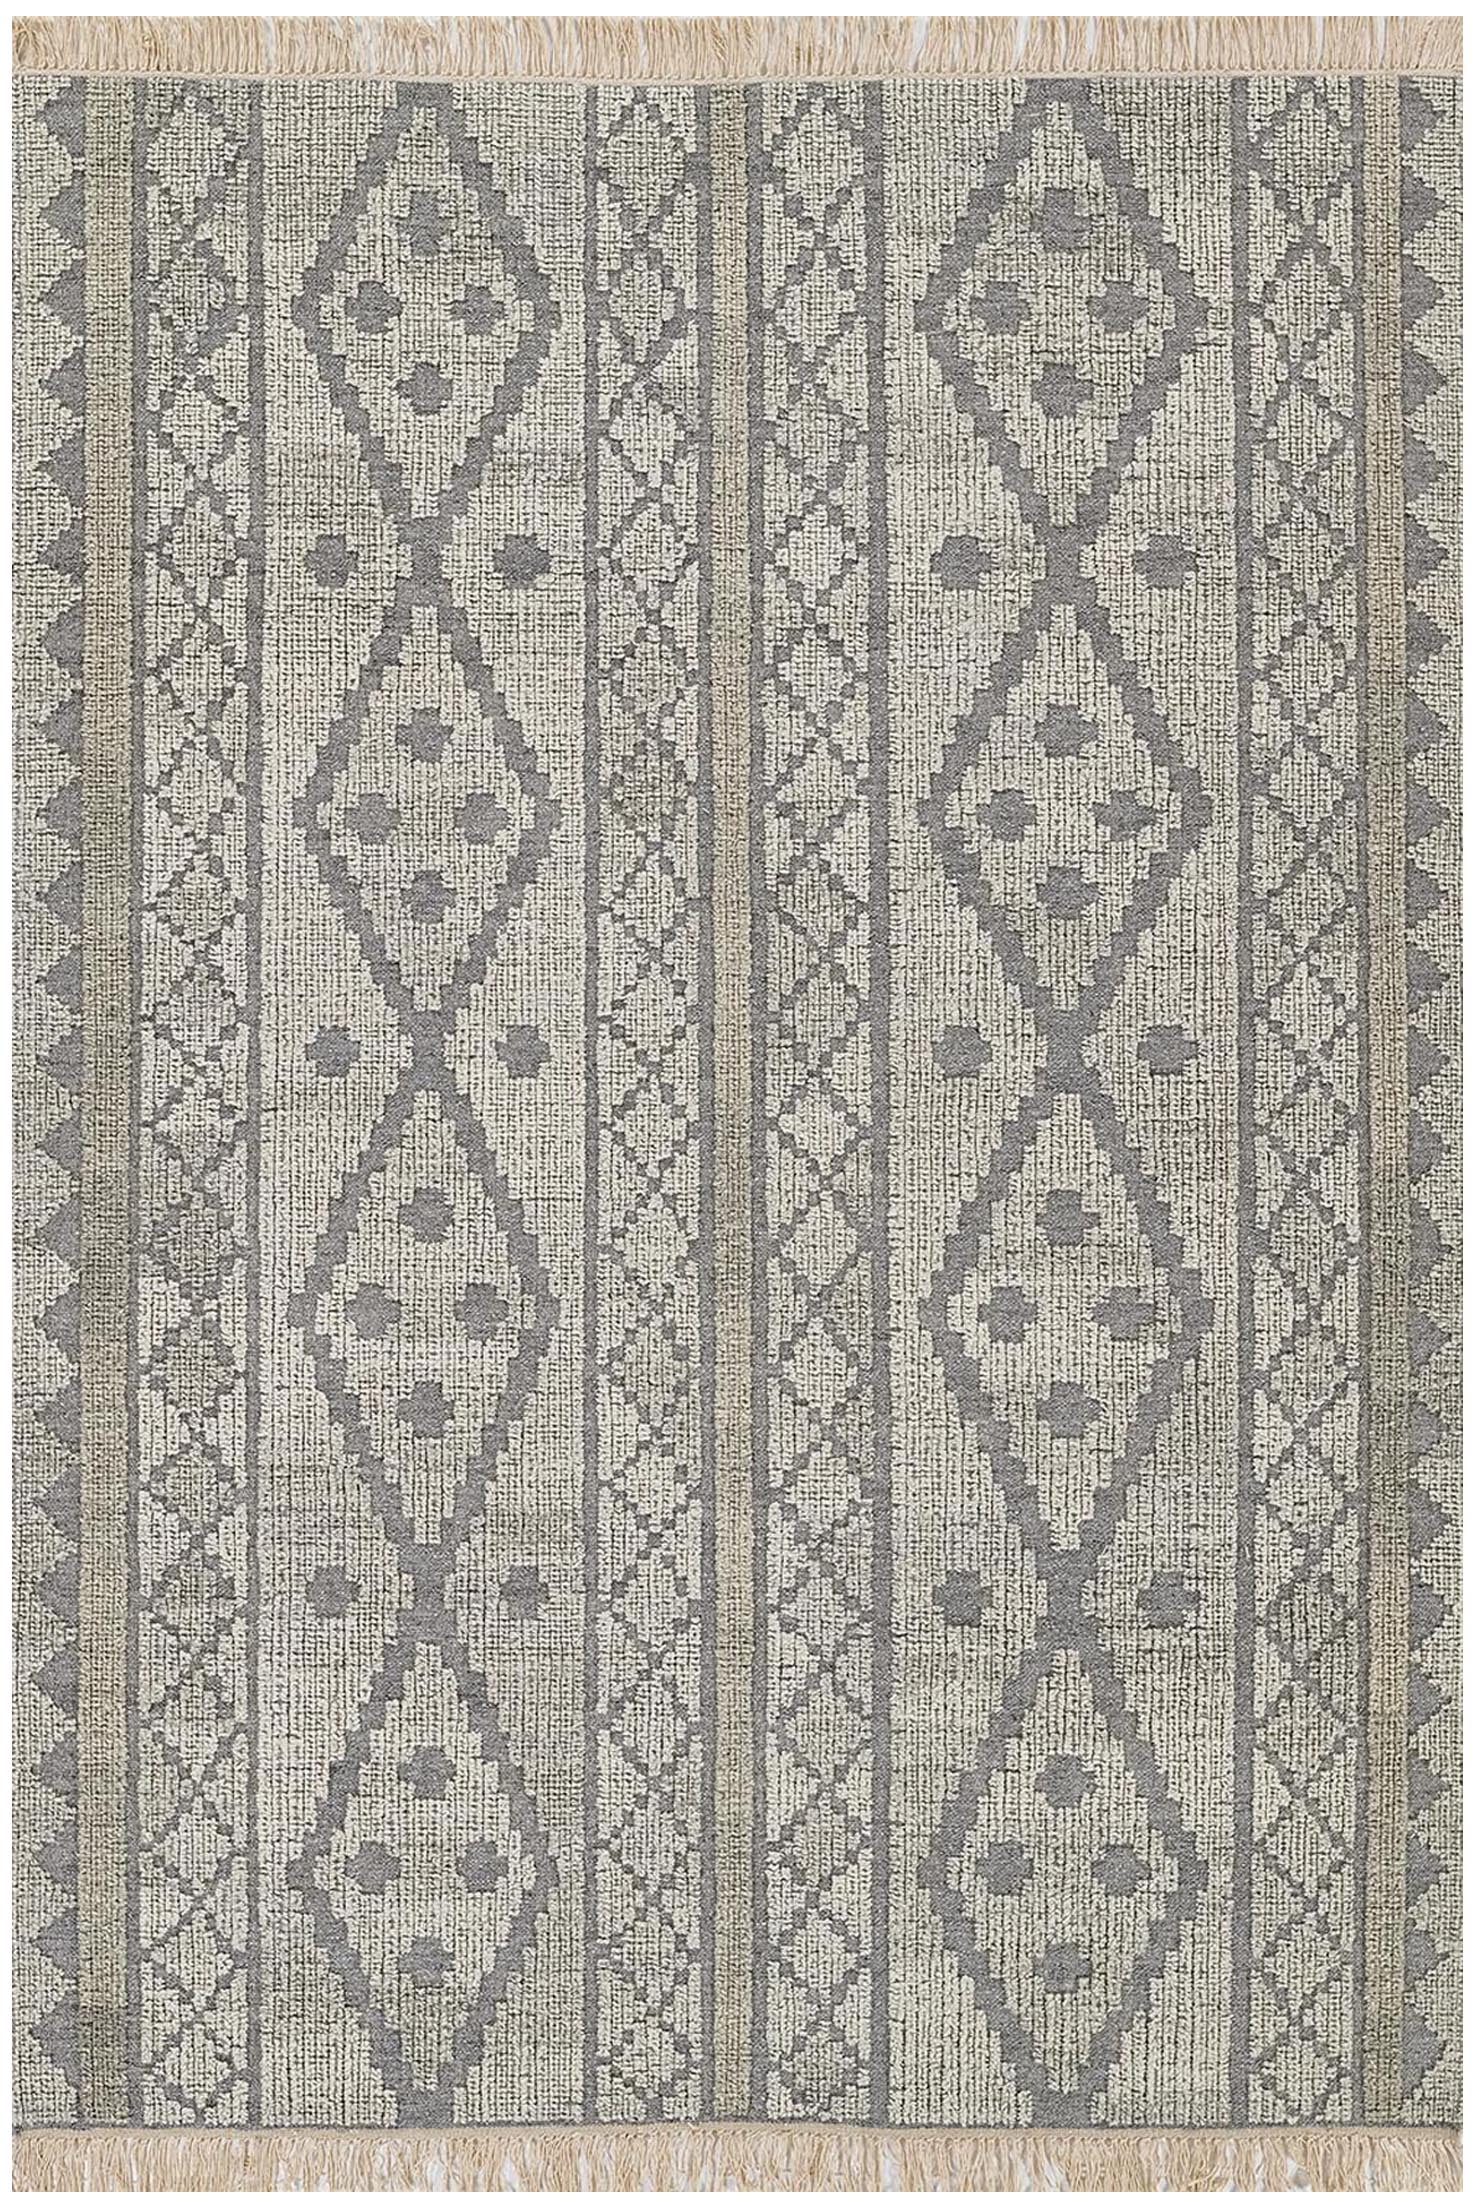 Southwest Hand Woven Wool & Cotton Gray Tone Area Rug